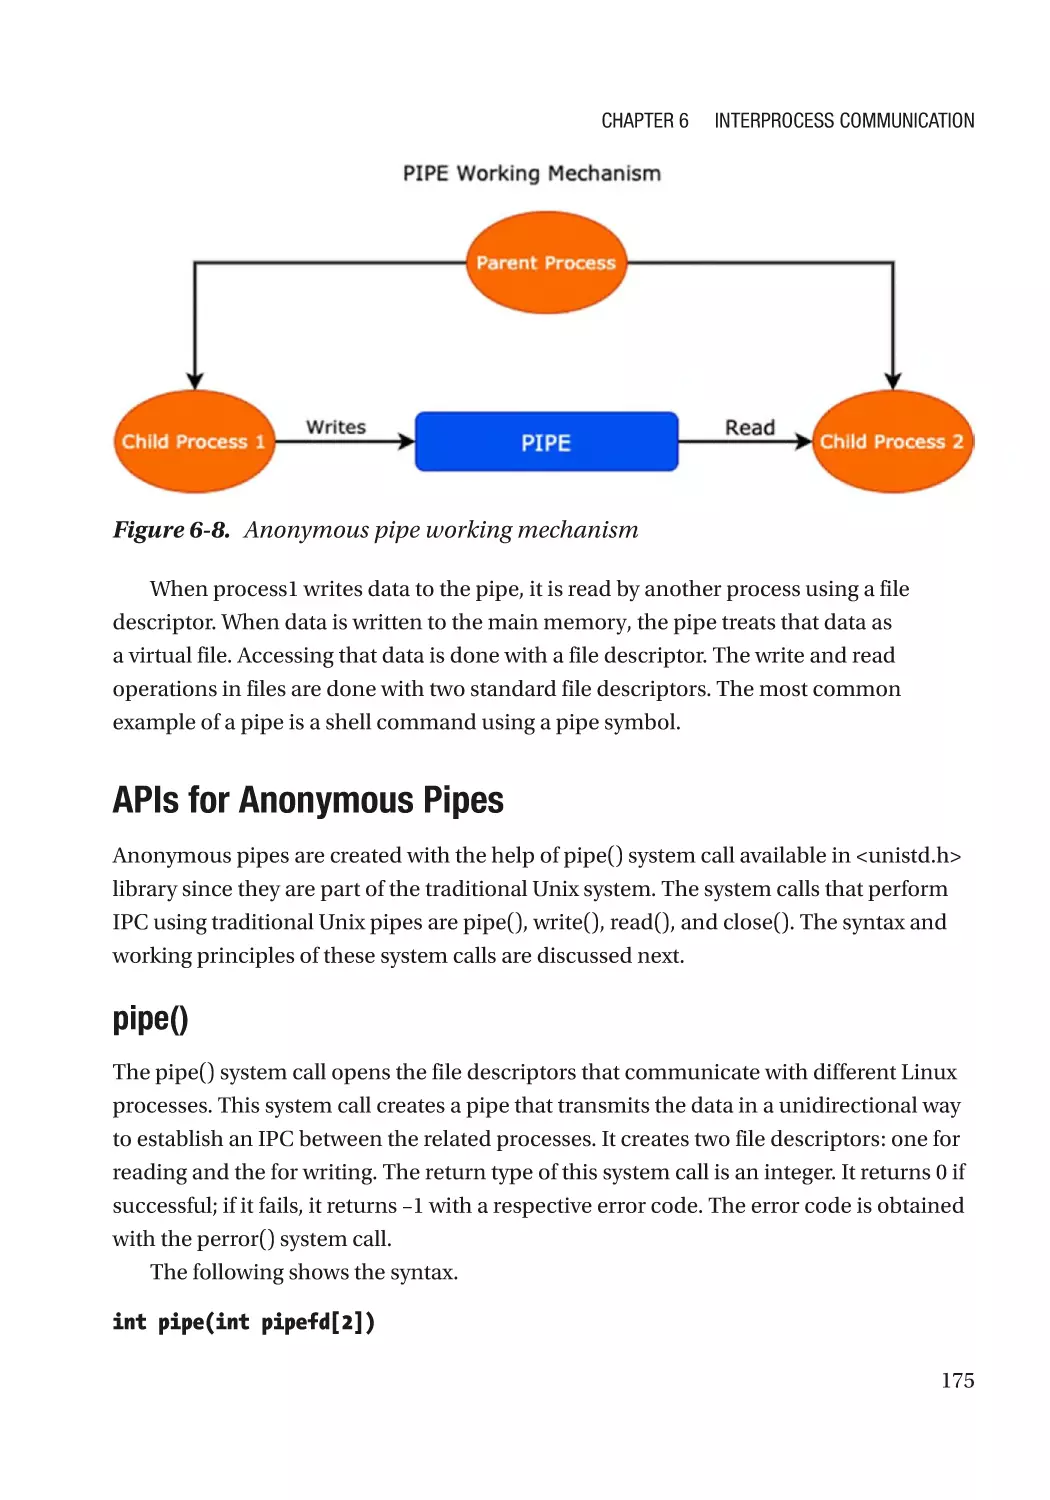 APIs for Anonymous Pipes
pipe()